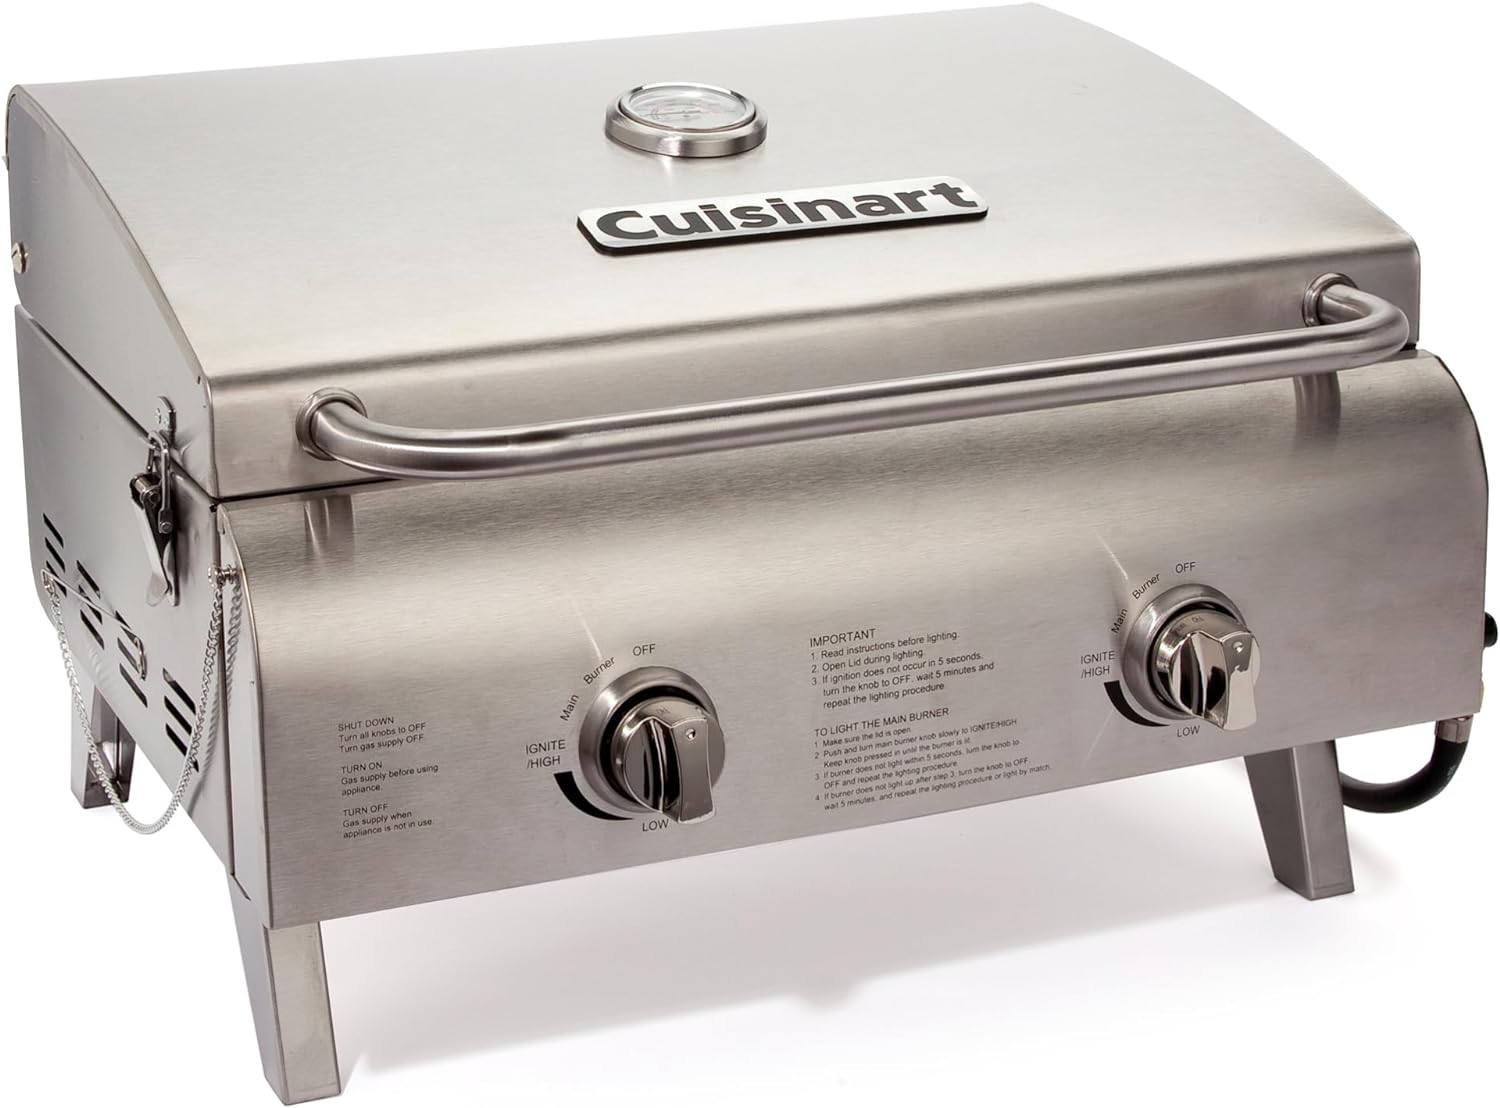 Cuisinart CGG-306 Chefs Style Portable Propane Tabletop 20,000, Professional Gas Grill, Two 10,000 BTU Burners, Stainless Steel